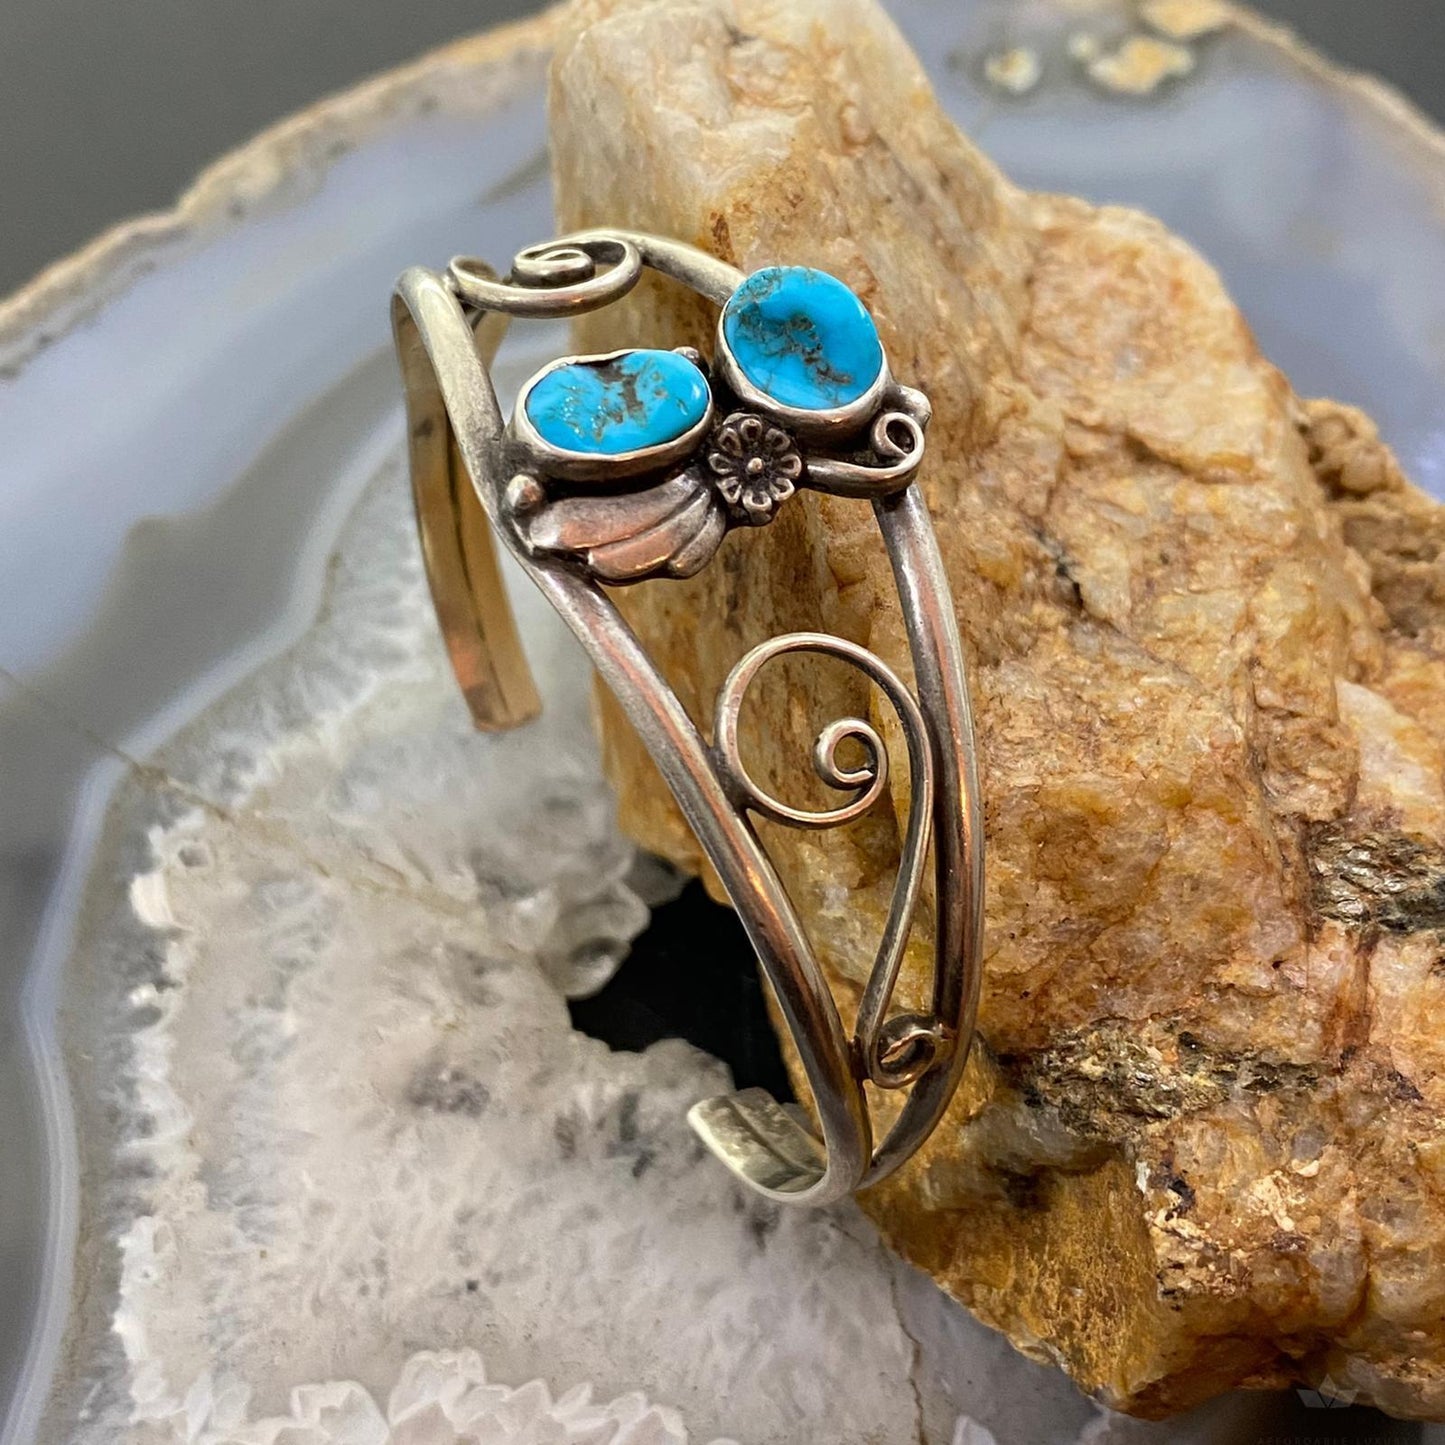 Vintage Native American Silver 2 Oval Kingman Turquoise Decorated Bracelet